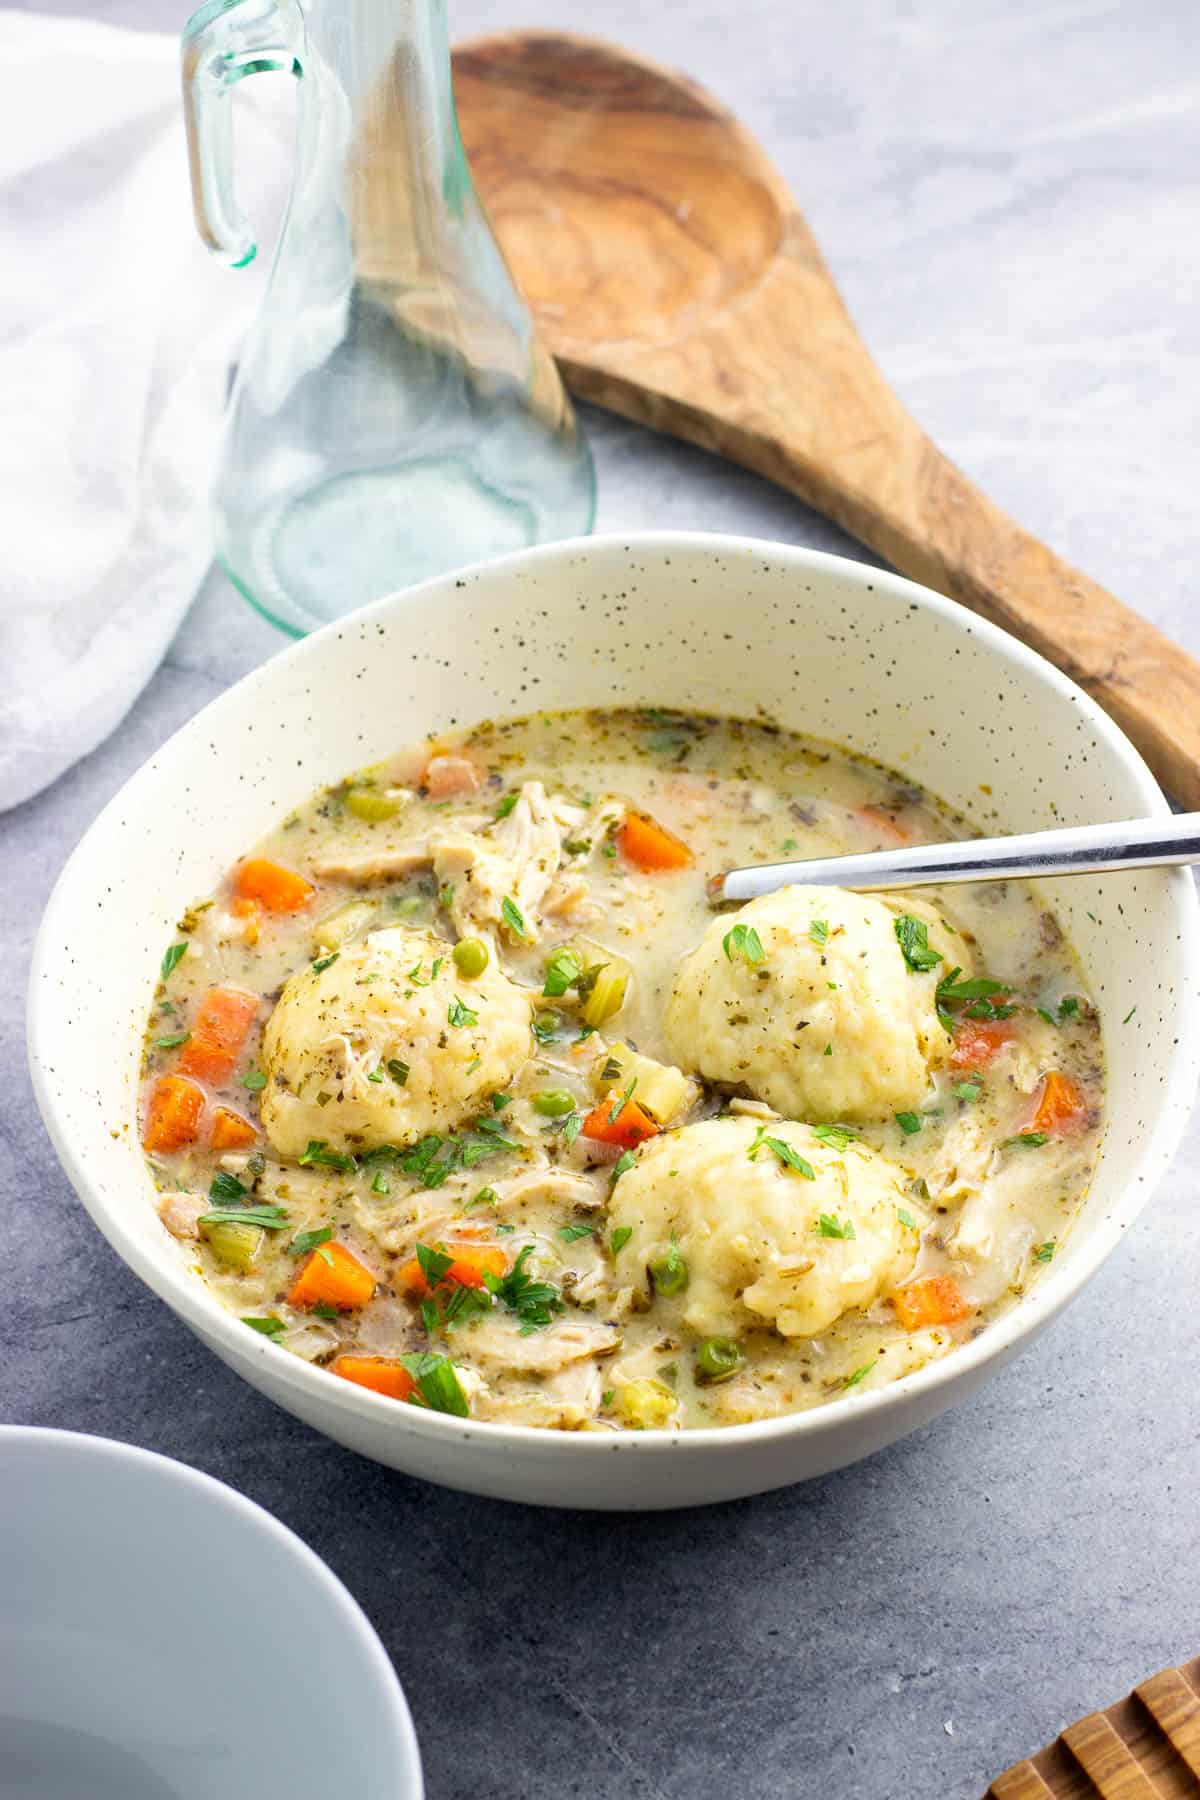 A bowl of chicken and dumplings garnished with fresh parsley.